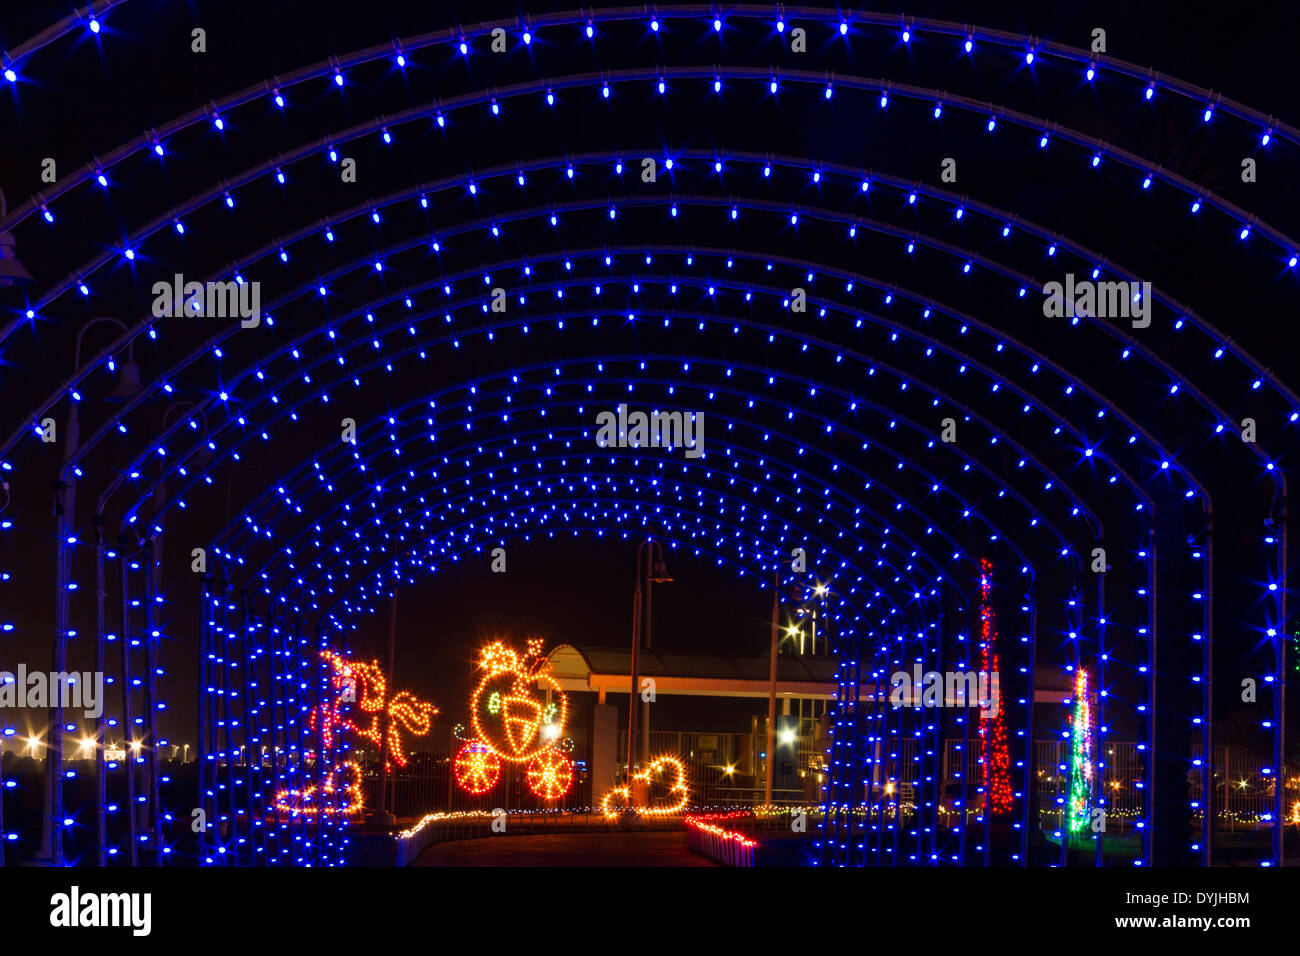 Christmas Lights And Displays At Moody Gardens In Galveston Texas